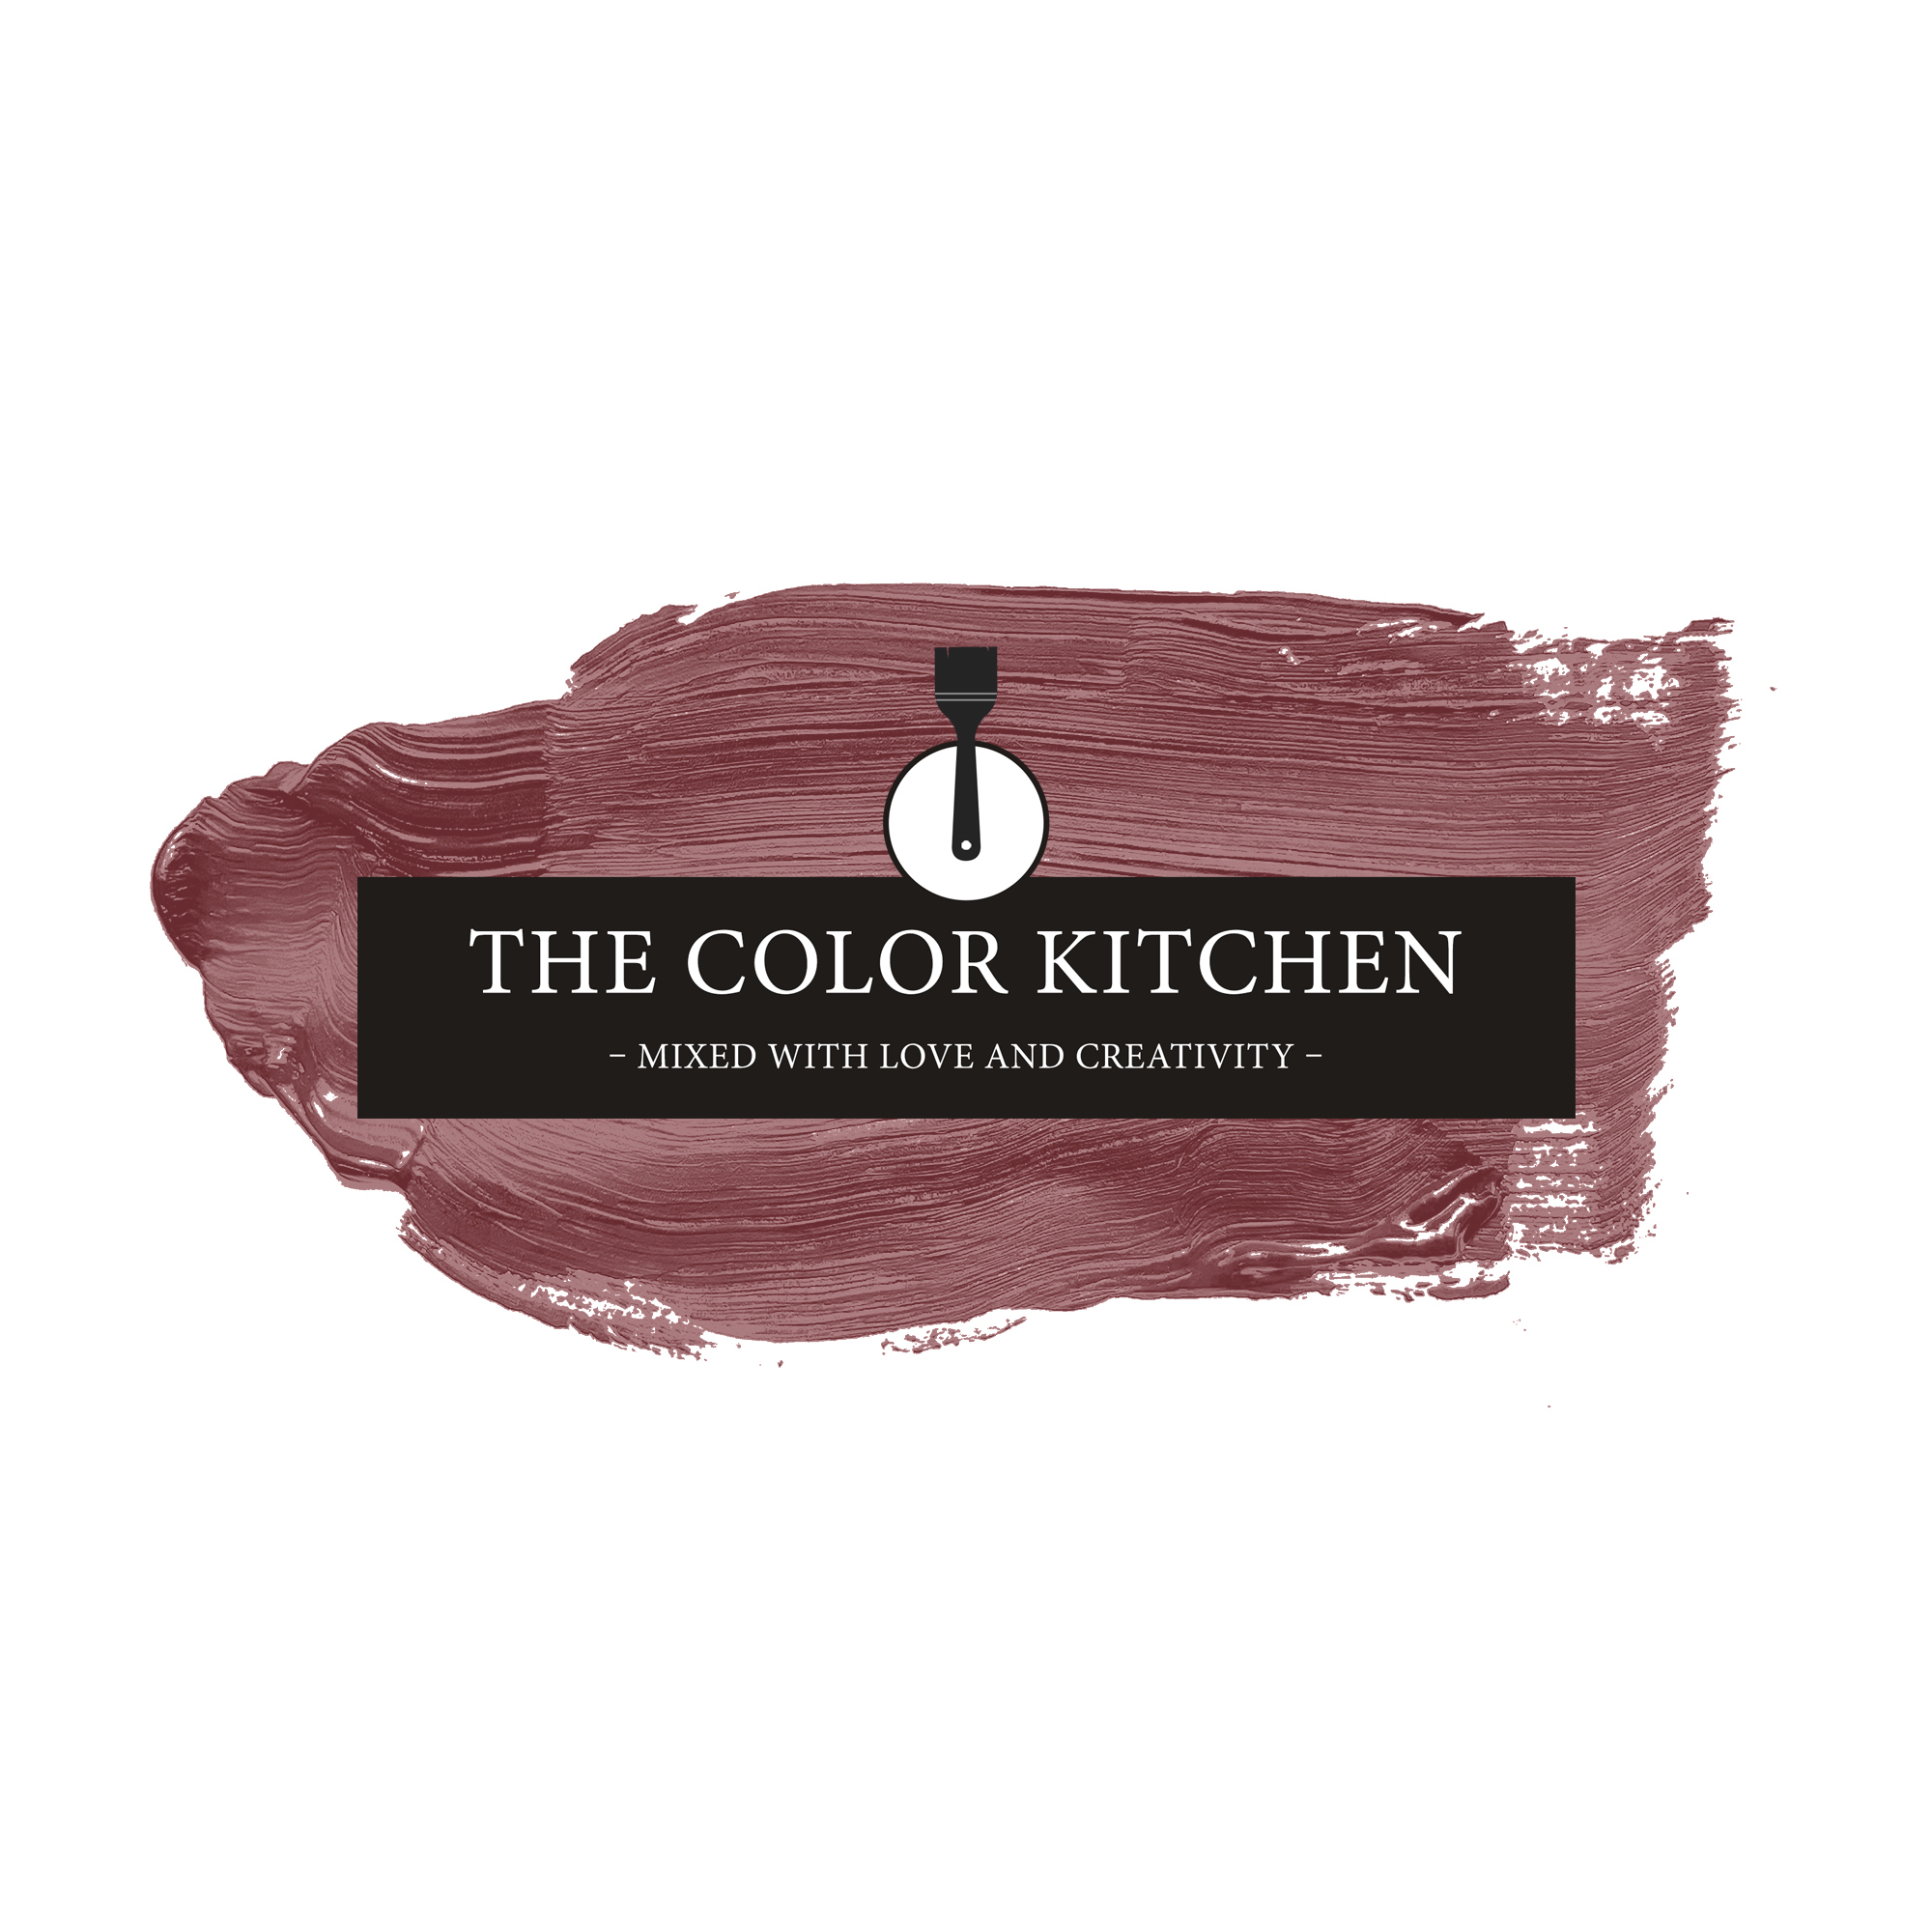 The Color Kitchen Sweet Marmelade 2,5 l